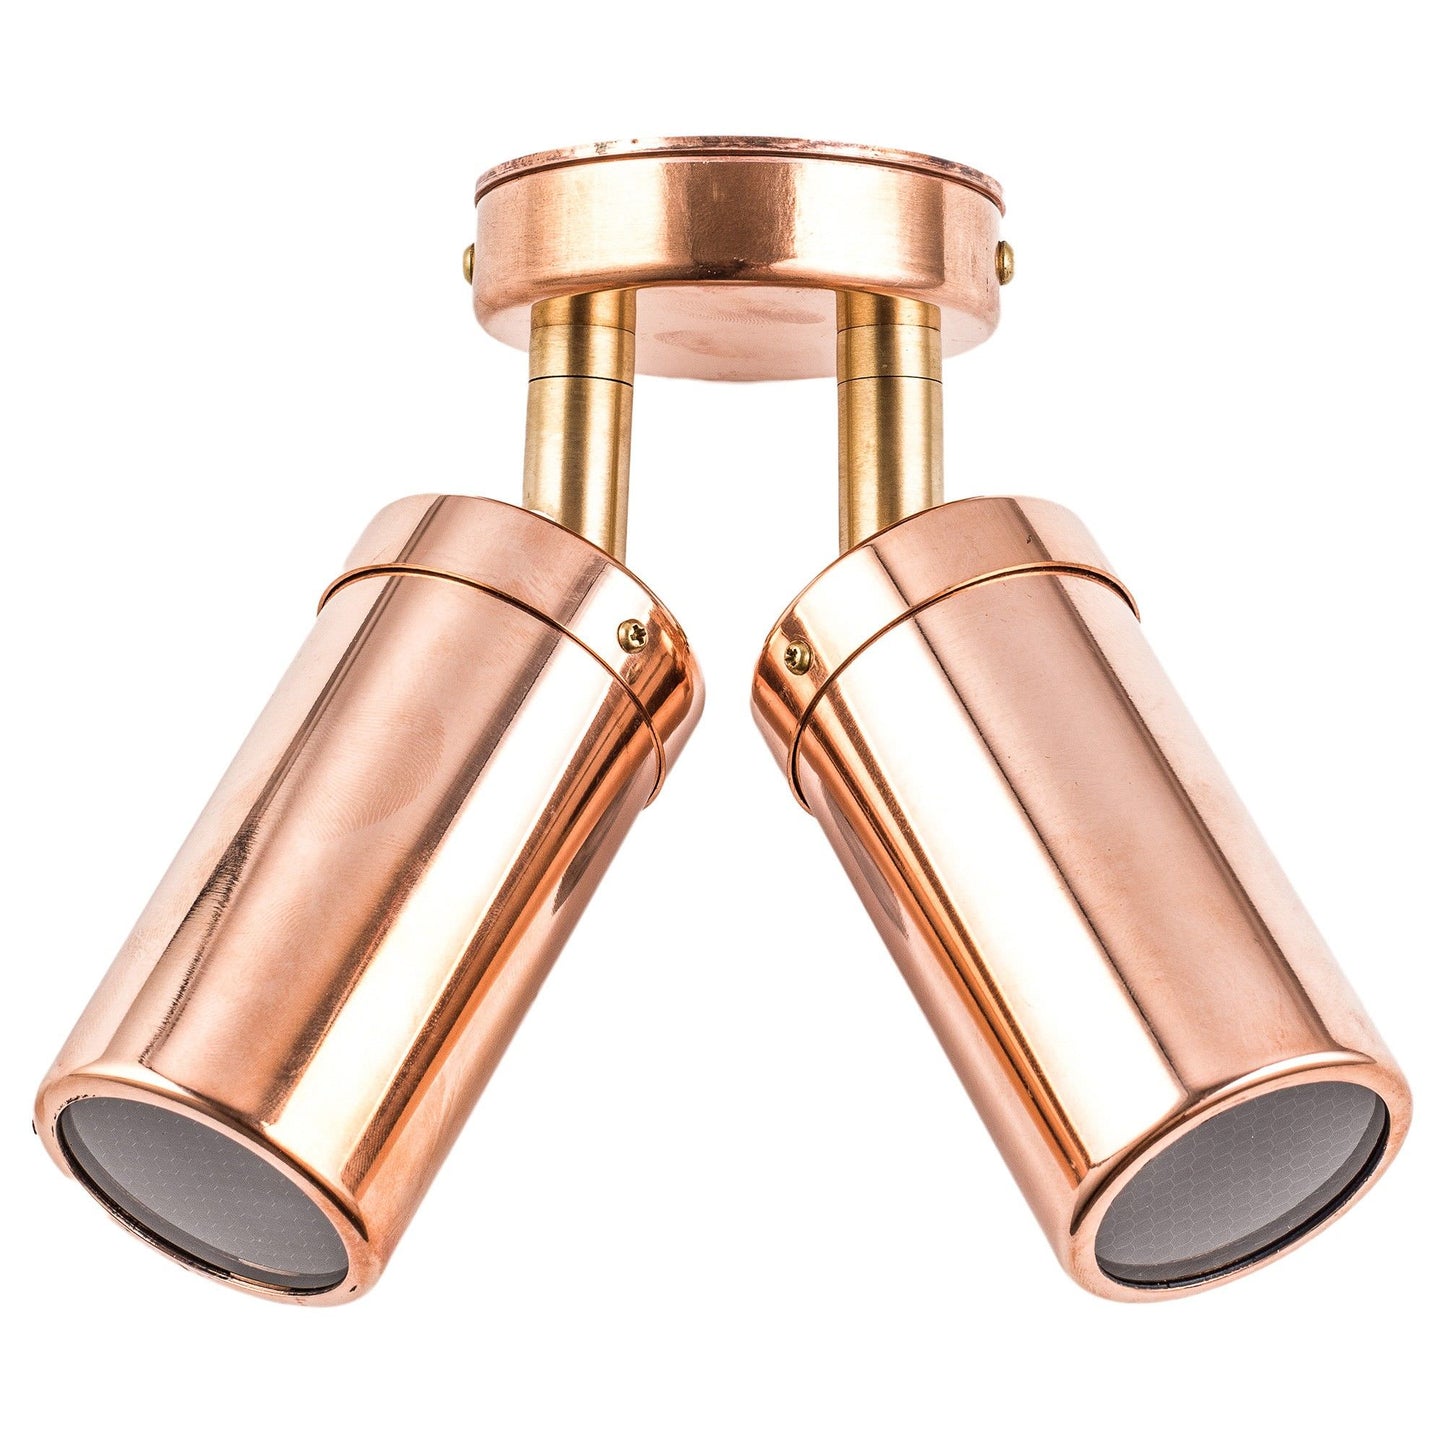 Roslin Economy IP54 Exterior Double Adjustable Wall Light, MR16, Copper with Brass Knuckle